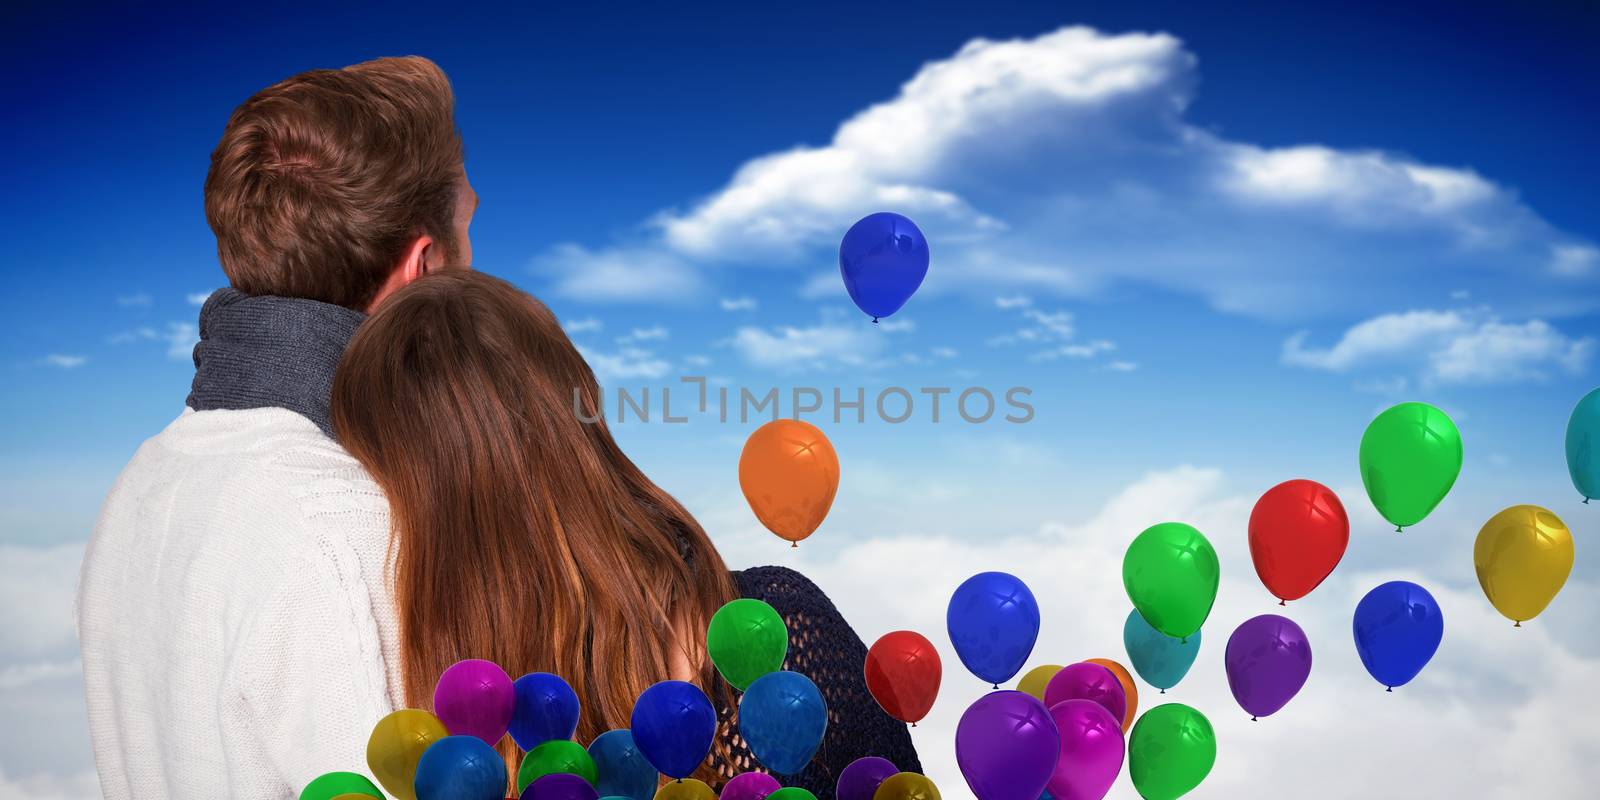 Close up rear view of romantic couple against bright blue sky with clouds